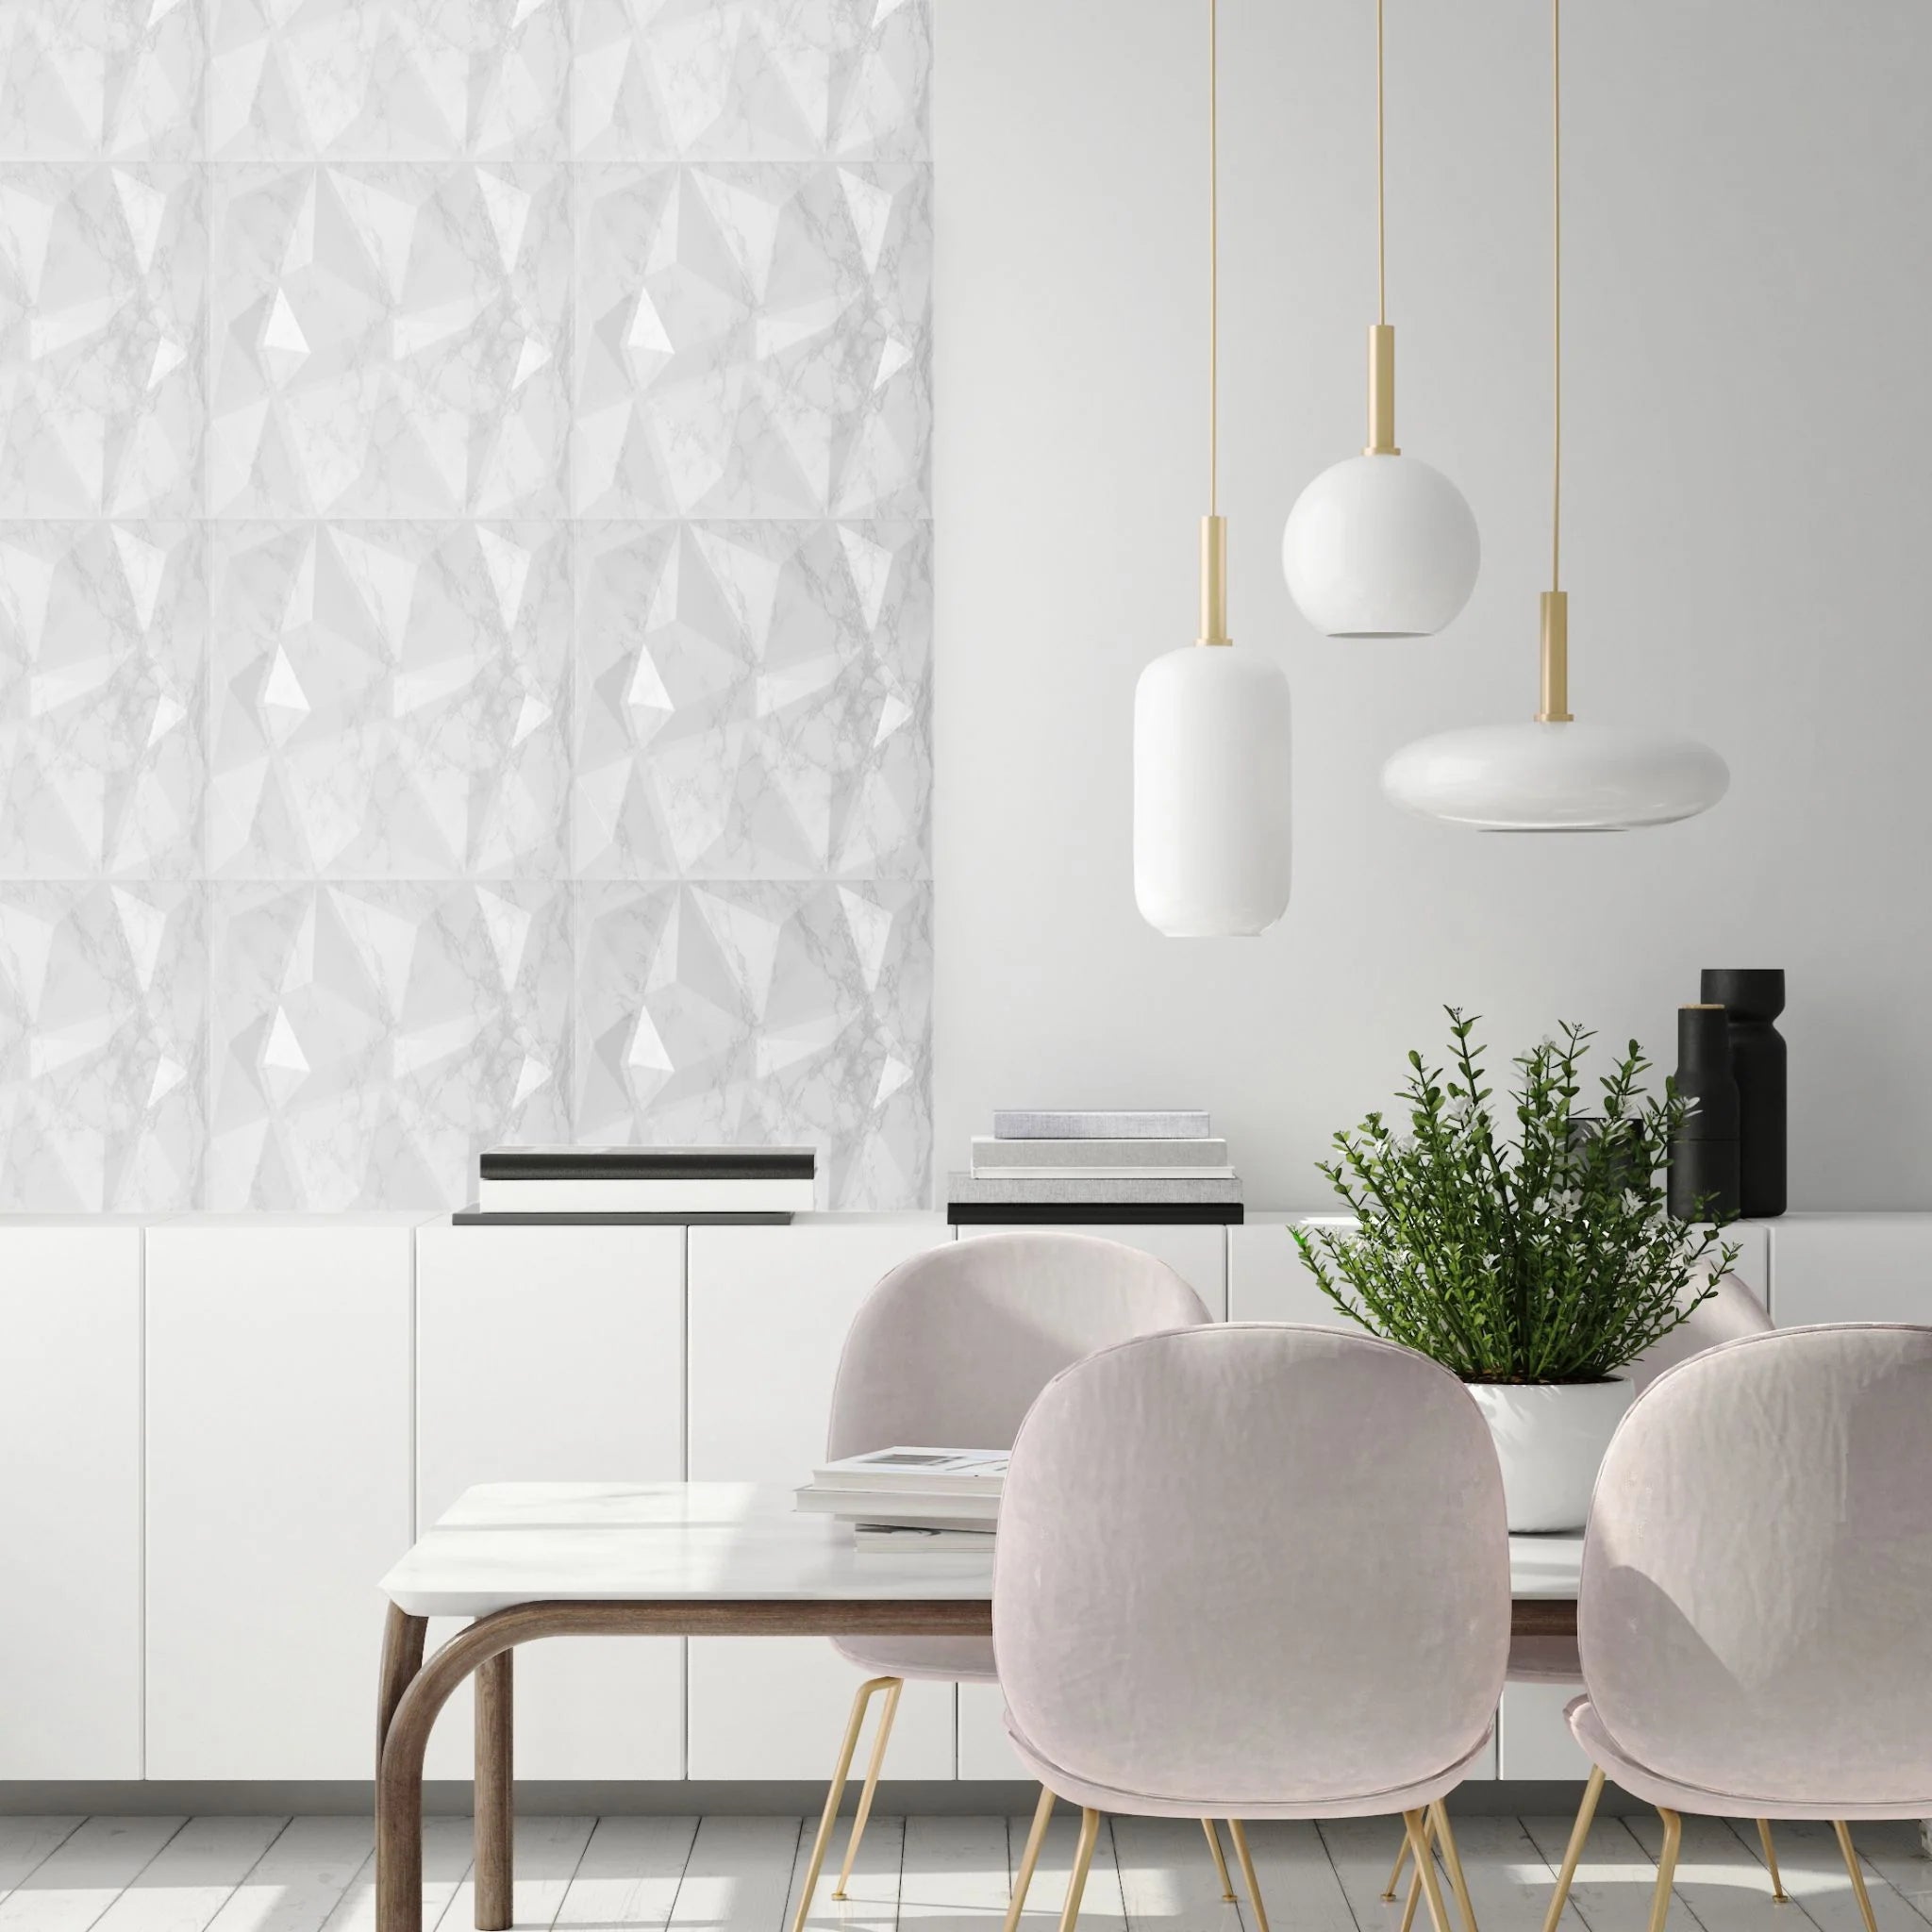 Marble PVC wall panel with geometric design in stylish living room